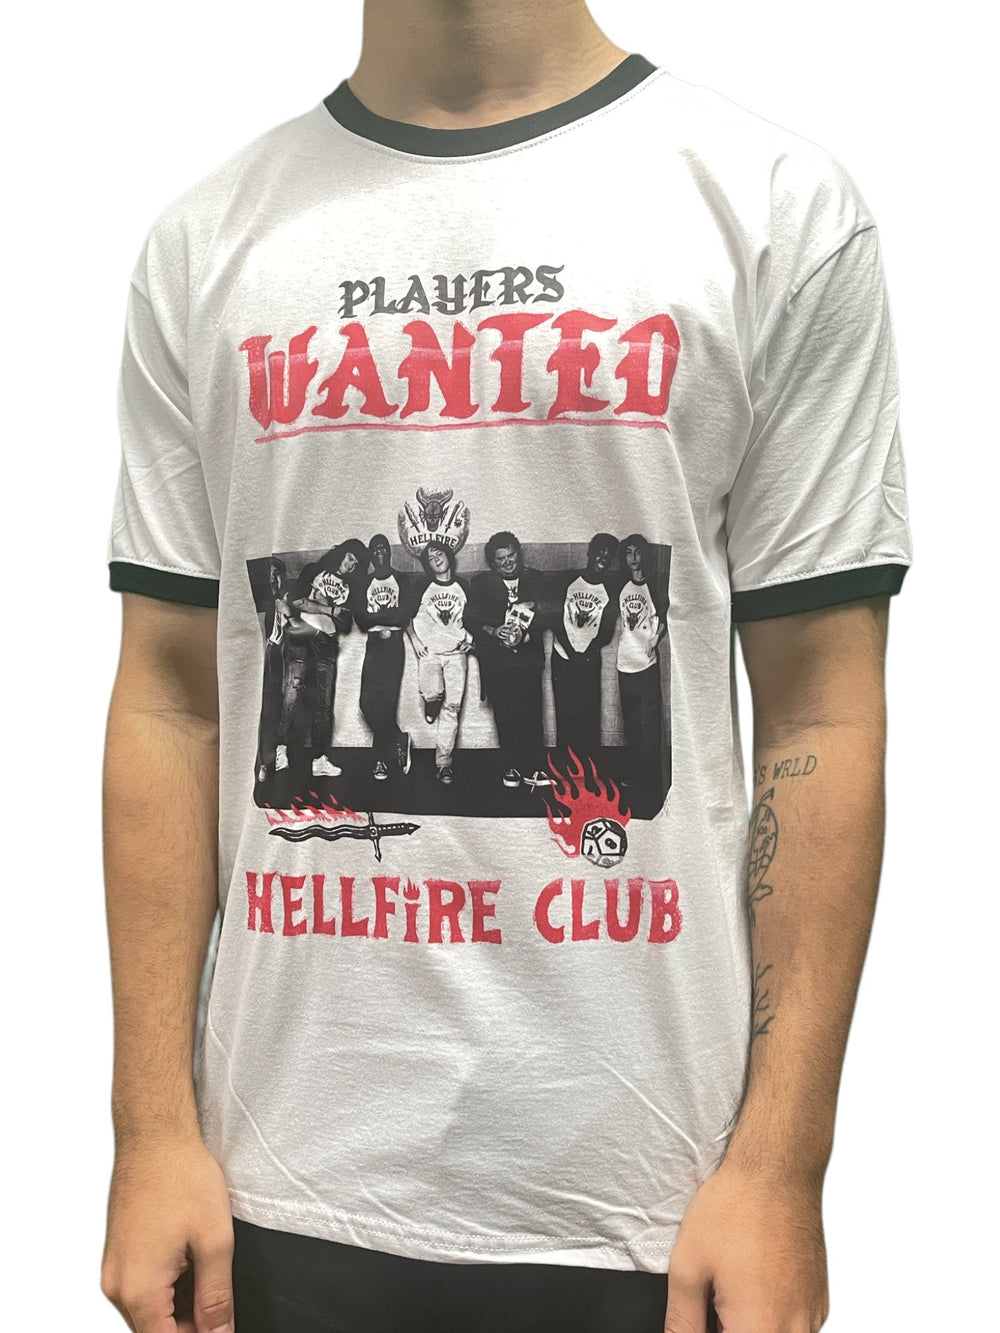 Stranger Things Hellfire Club Players Wanted Ringer Unisex Official T Shirt Brand New Various Sizes